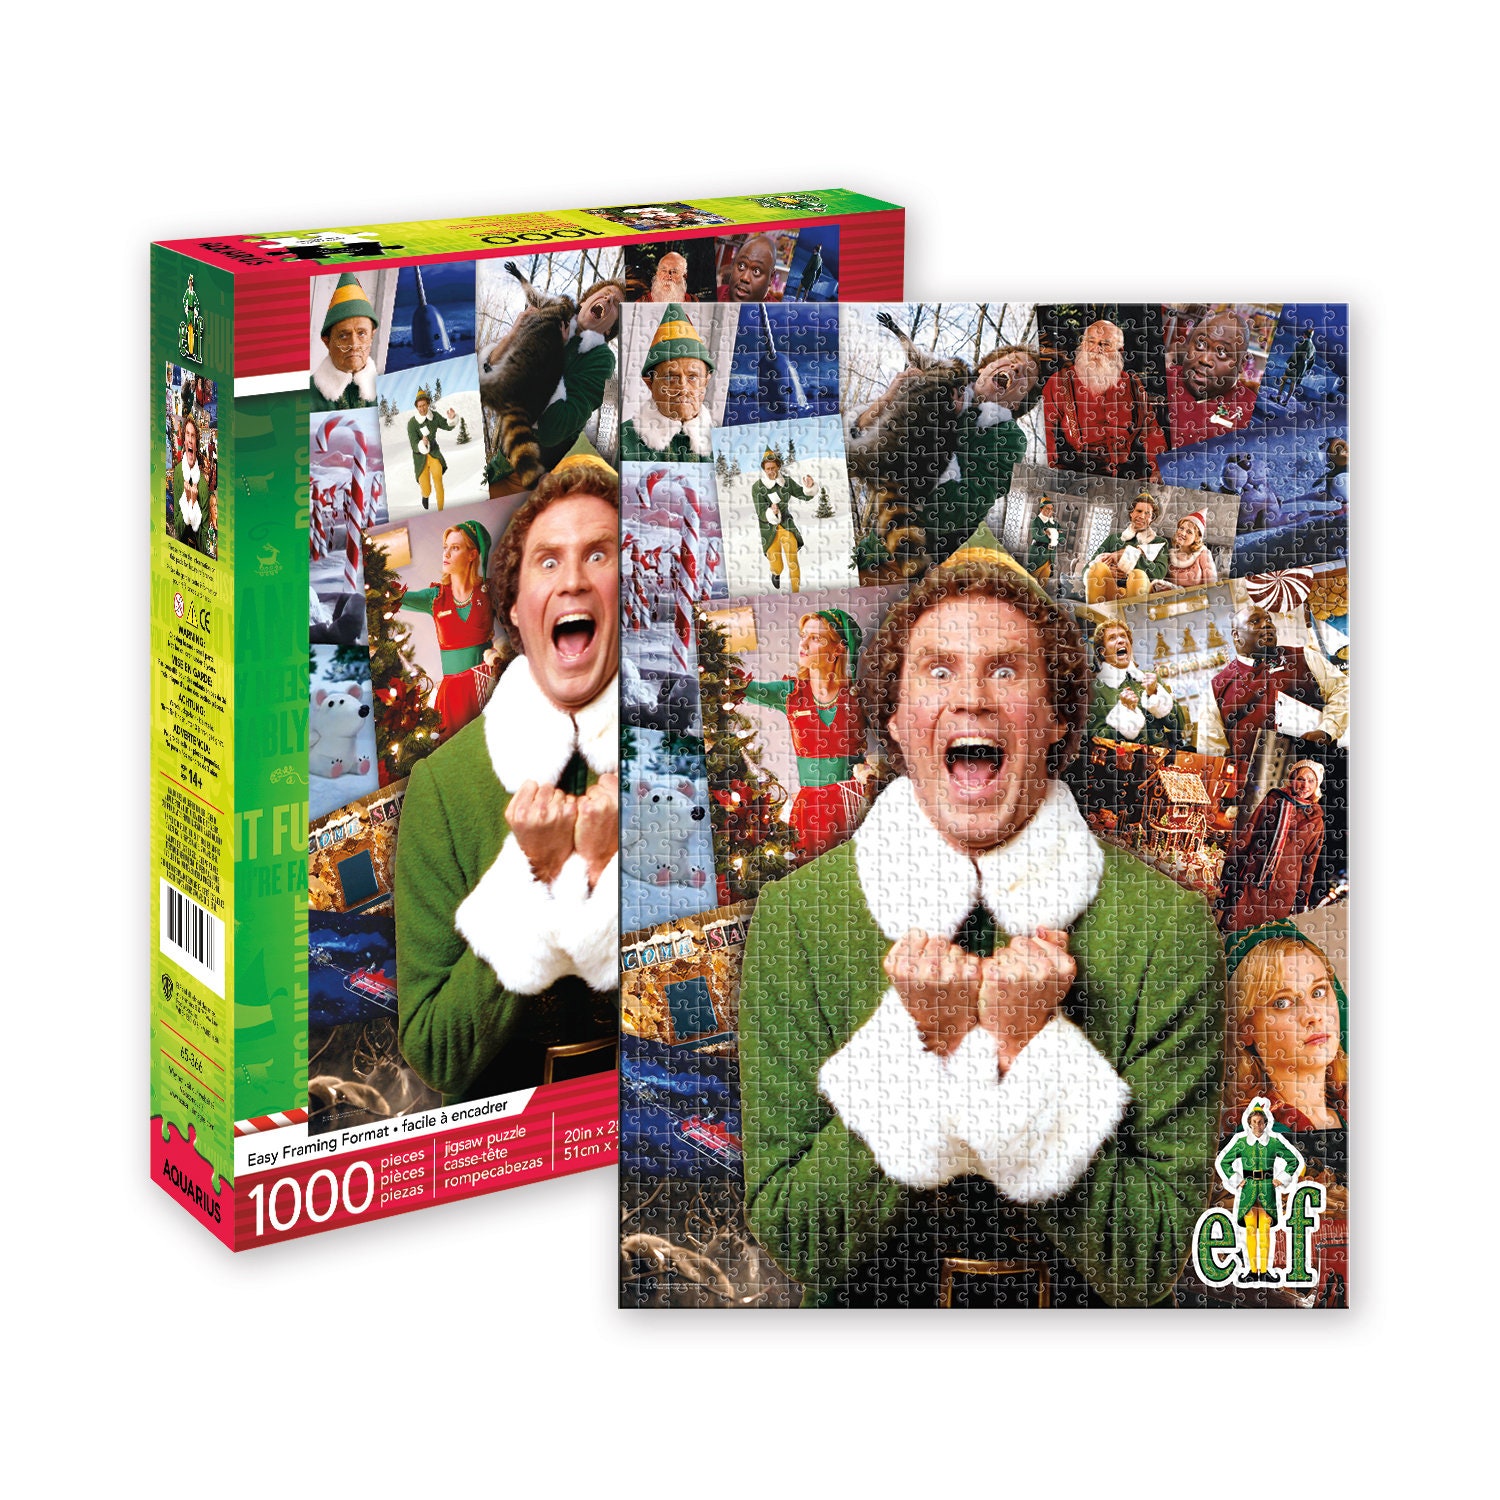 Buddy the ELF Movie Lot 3 items Puzzle, Bobnlehead, Koozie/Cup